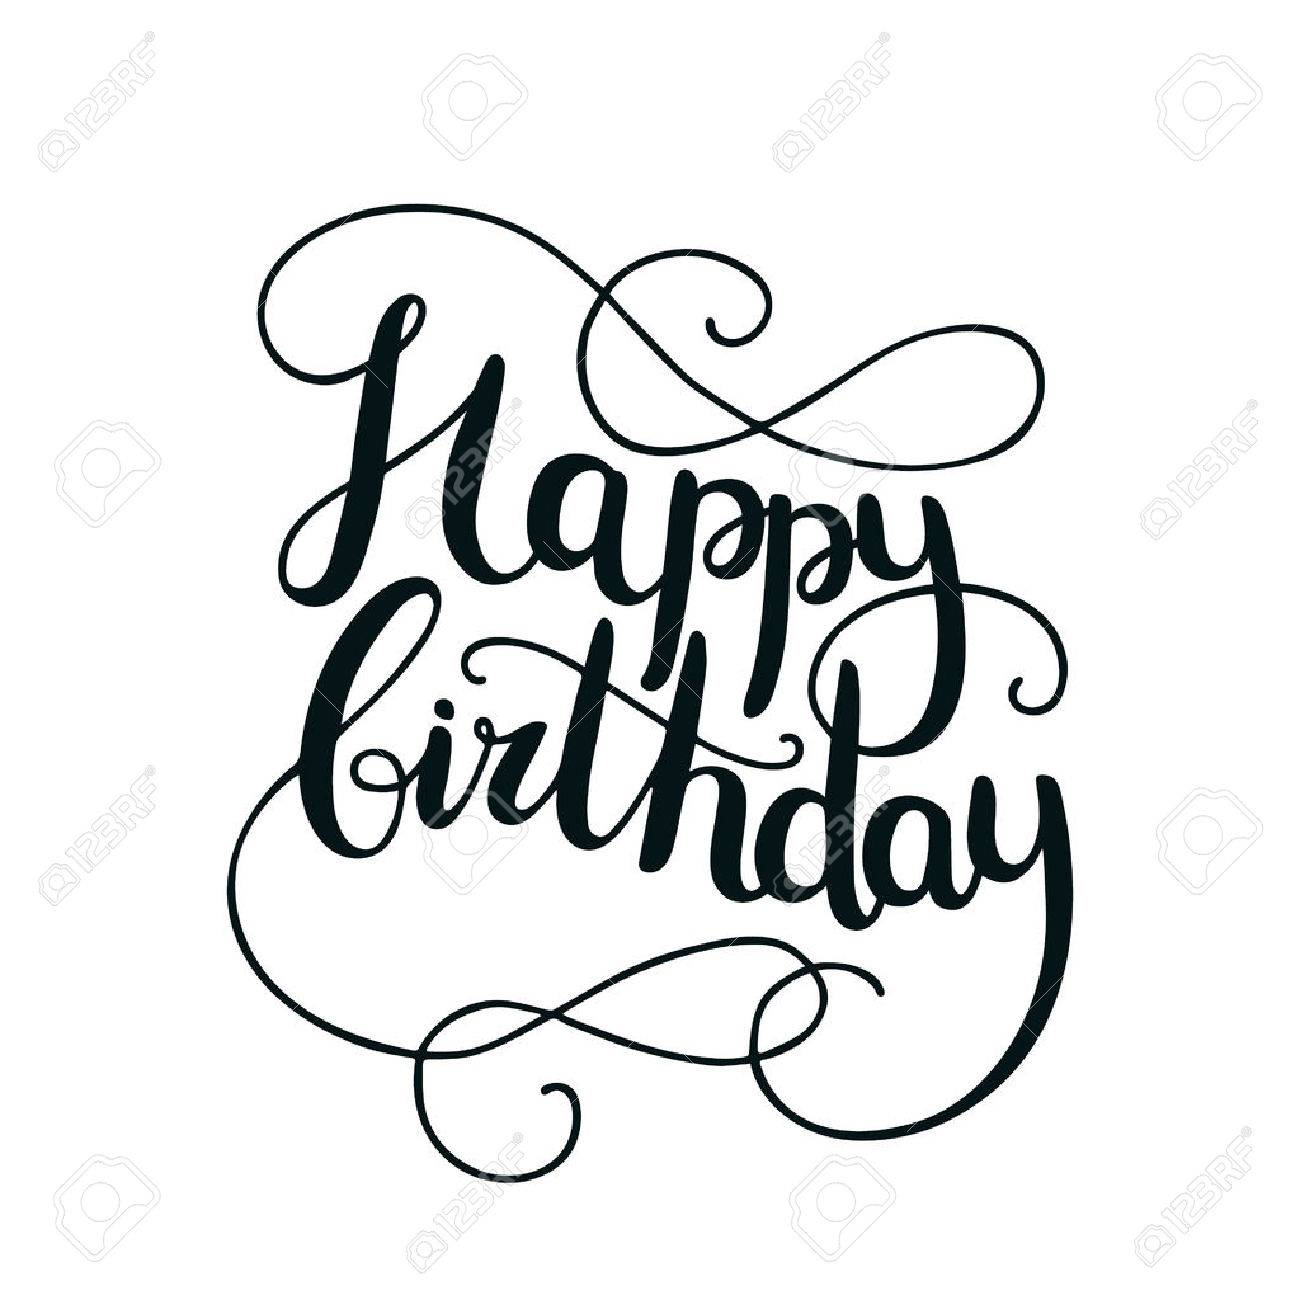 Birthday Drawing Images at GetDrawings | Free download